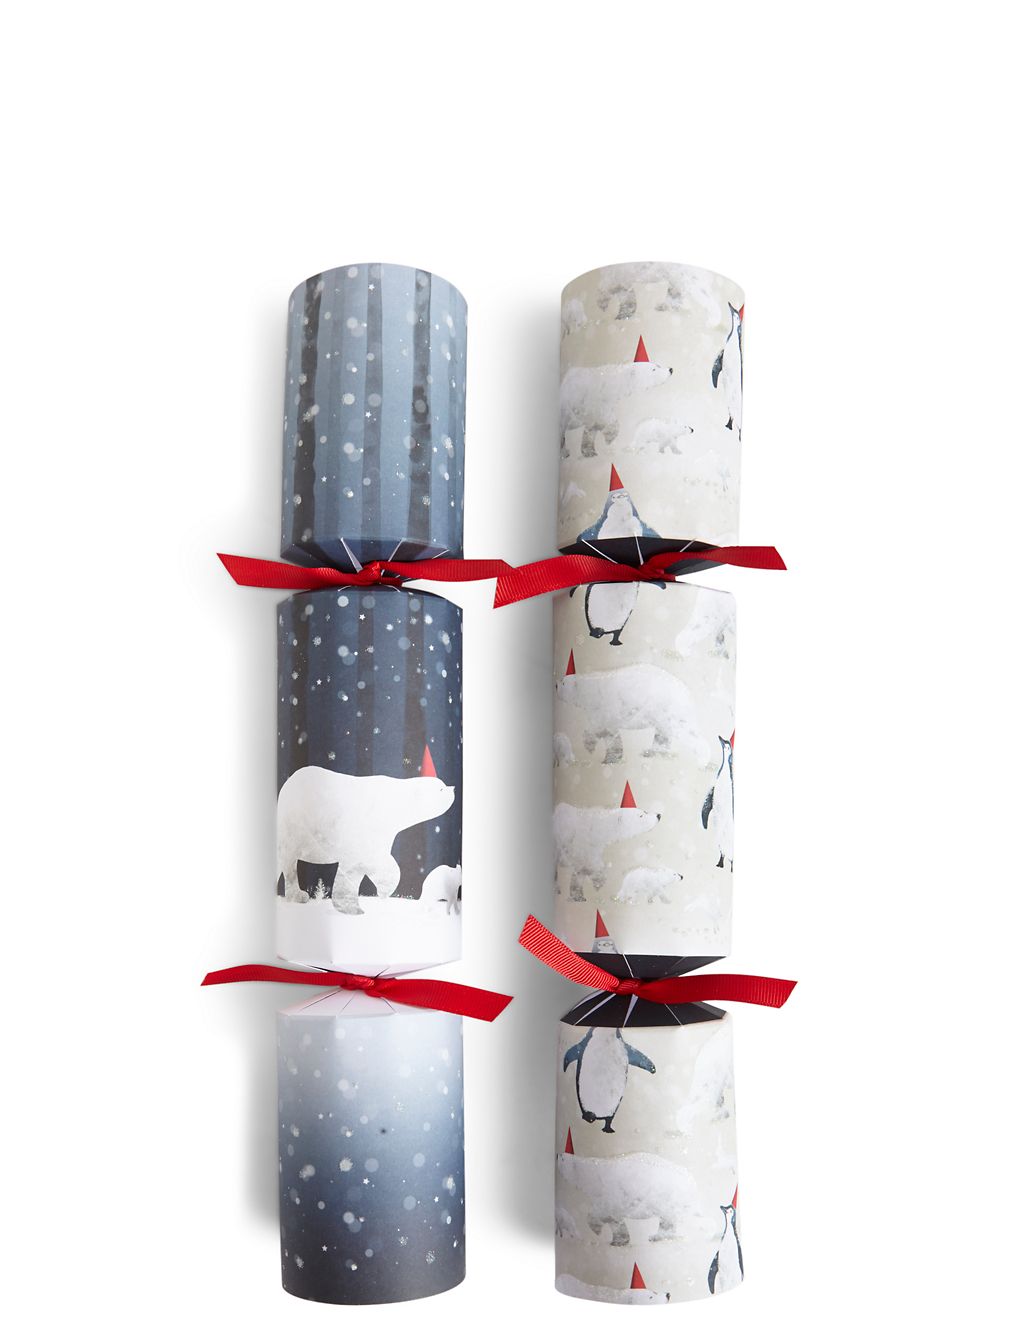 Arctic Animal Christmas Crackers Pack of 12 1 of 4